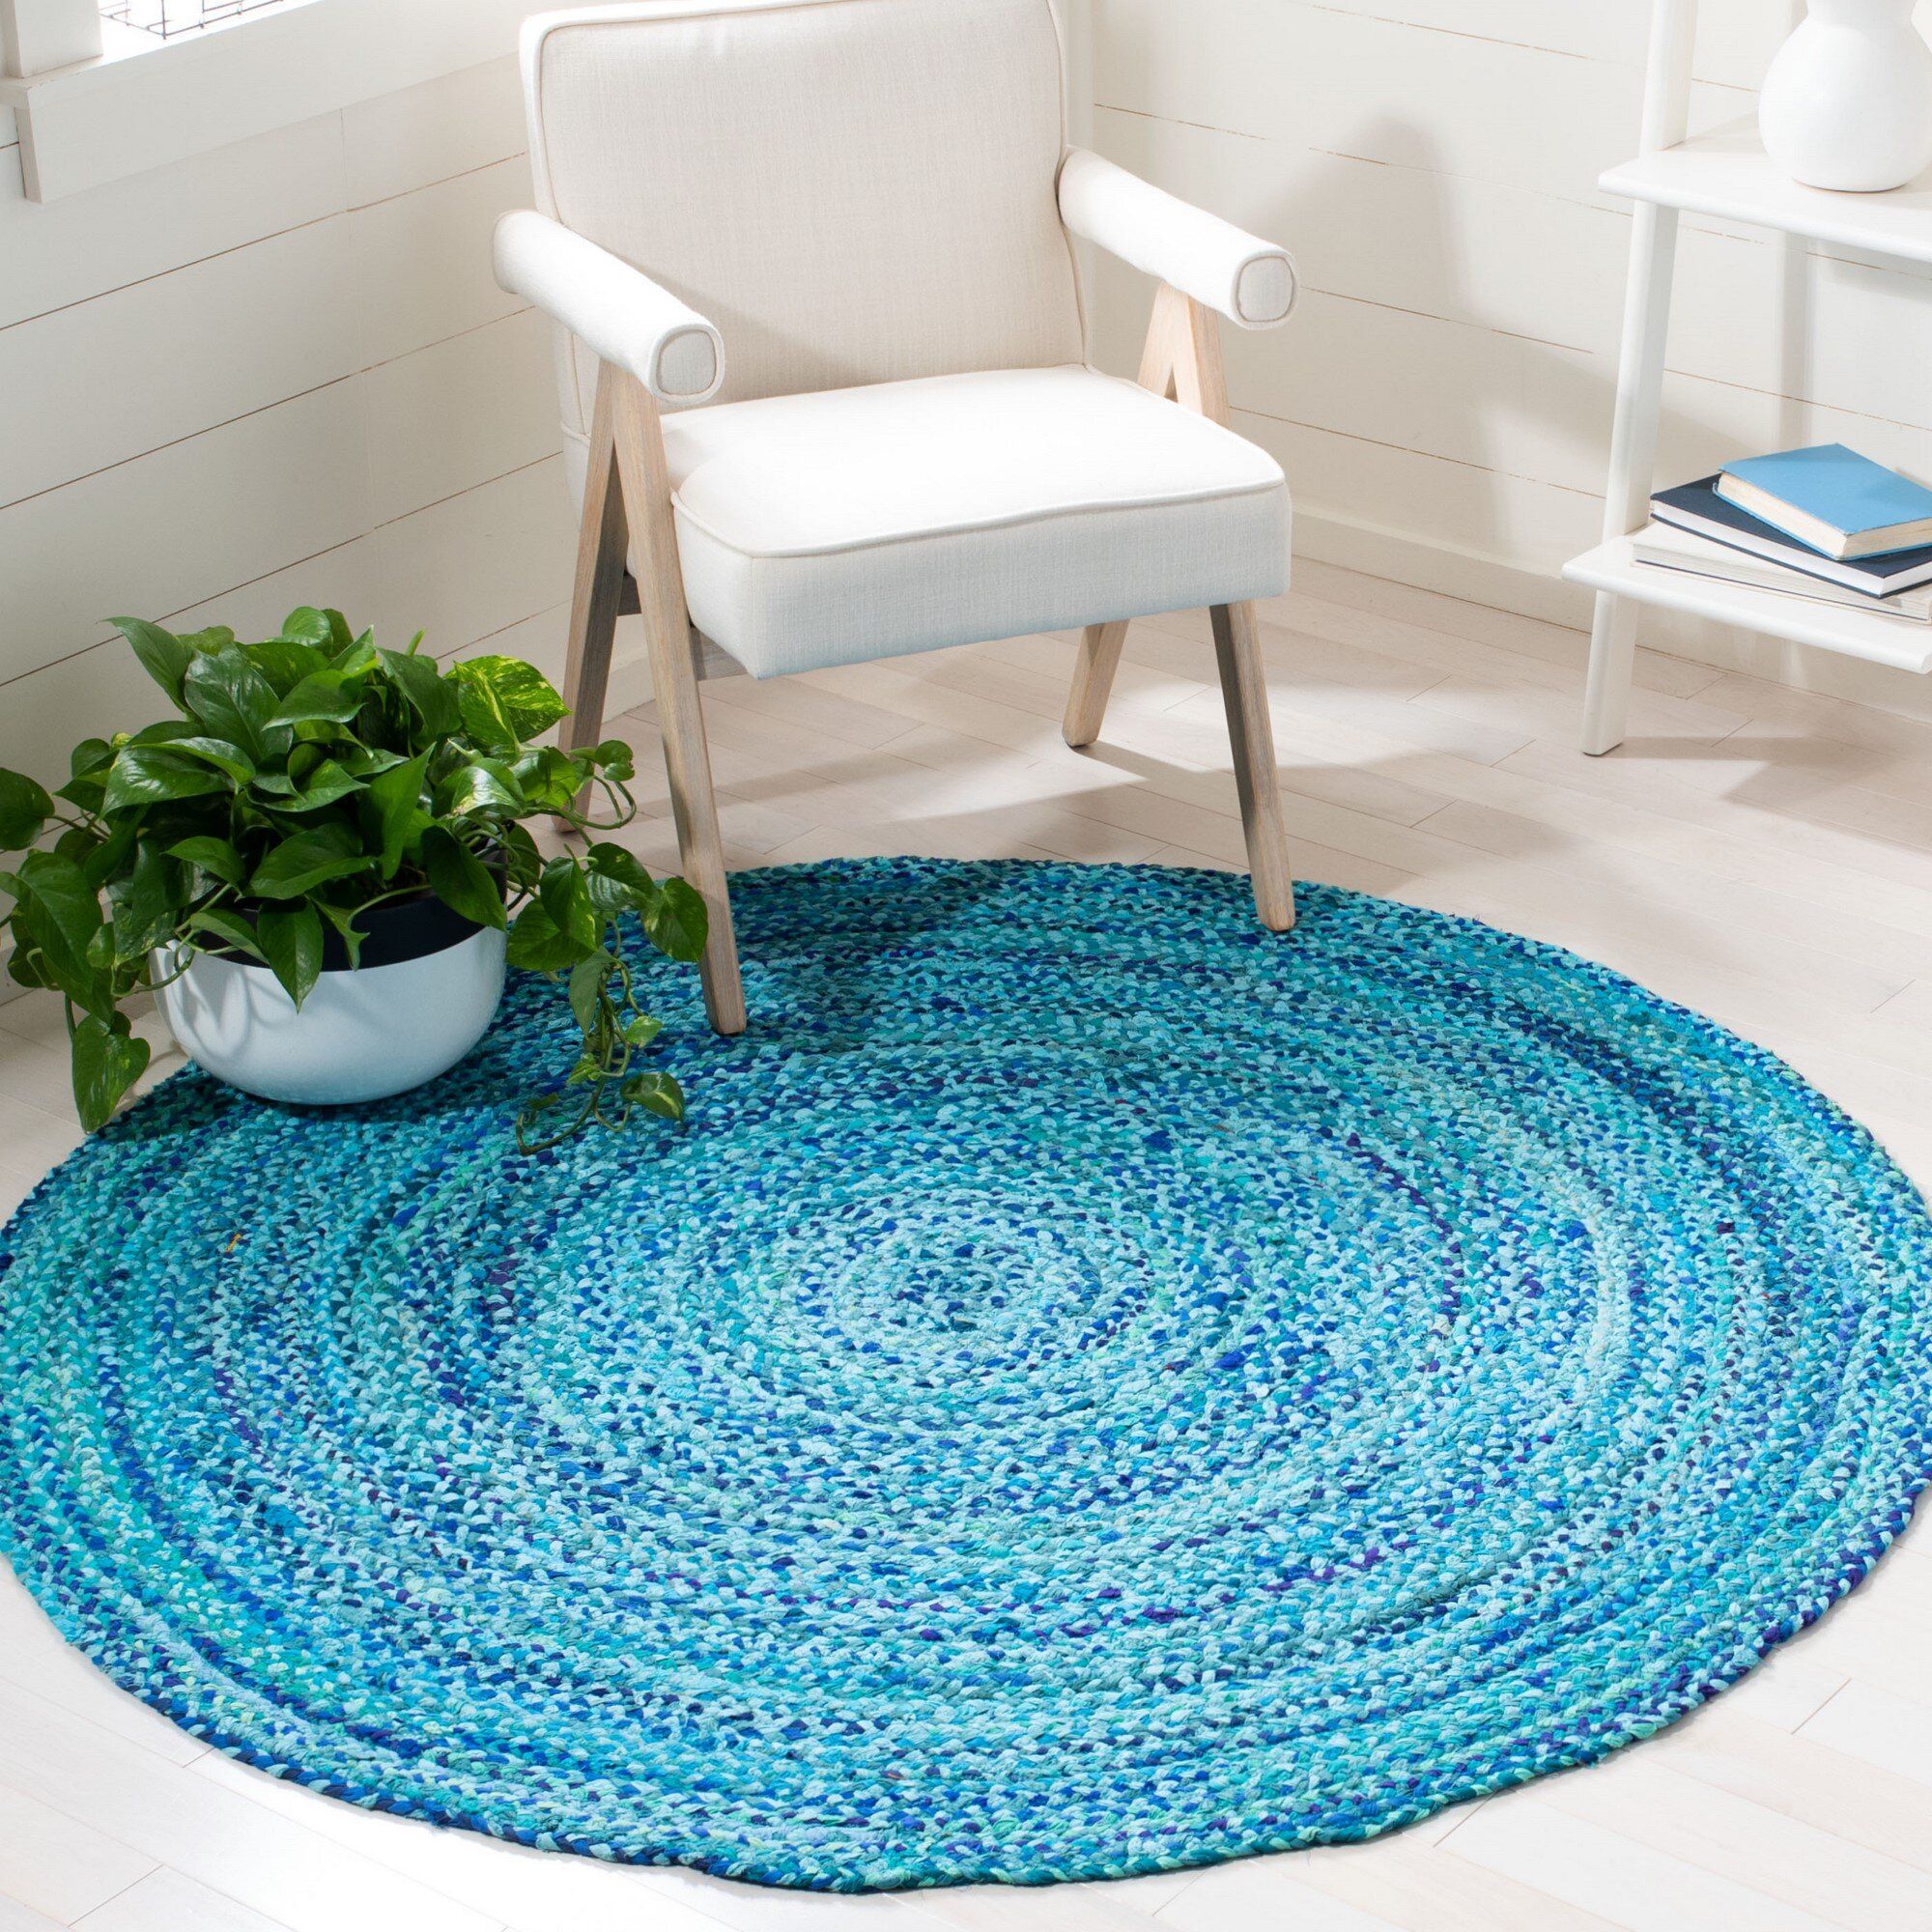 Highland Dunes Newberg Handmade Flatweave Cotton Turquoise Rug & Reviews |  Wayfair Throughout Turquoise Rugs (View 6 of 15)